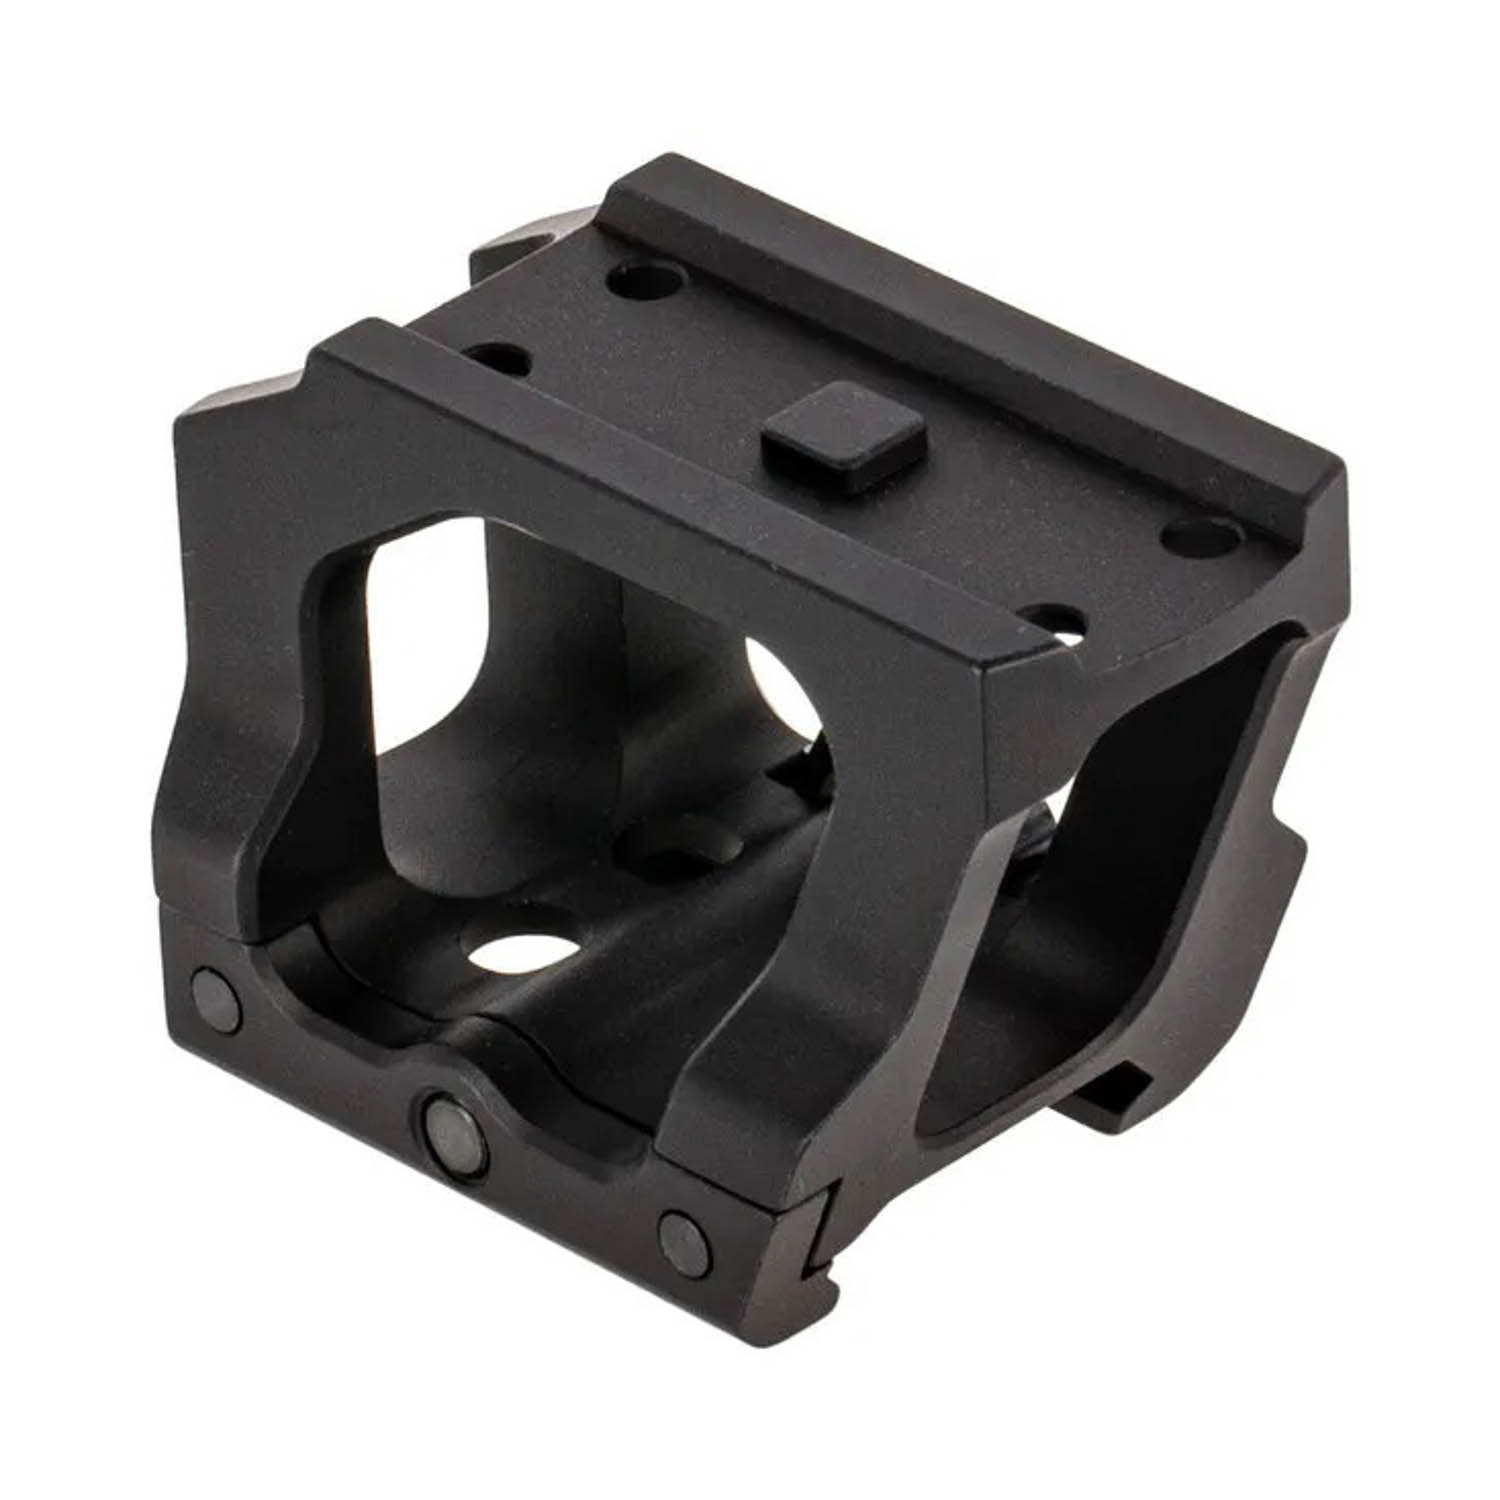 Scalarworks LEAP/01 Aimpoint Micro T-2 Red Dot Mount, 1.93